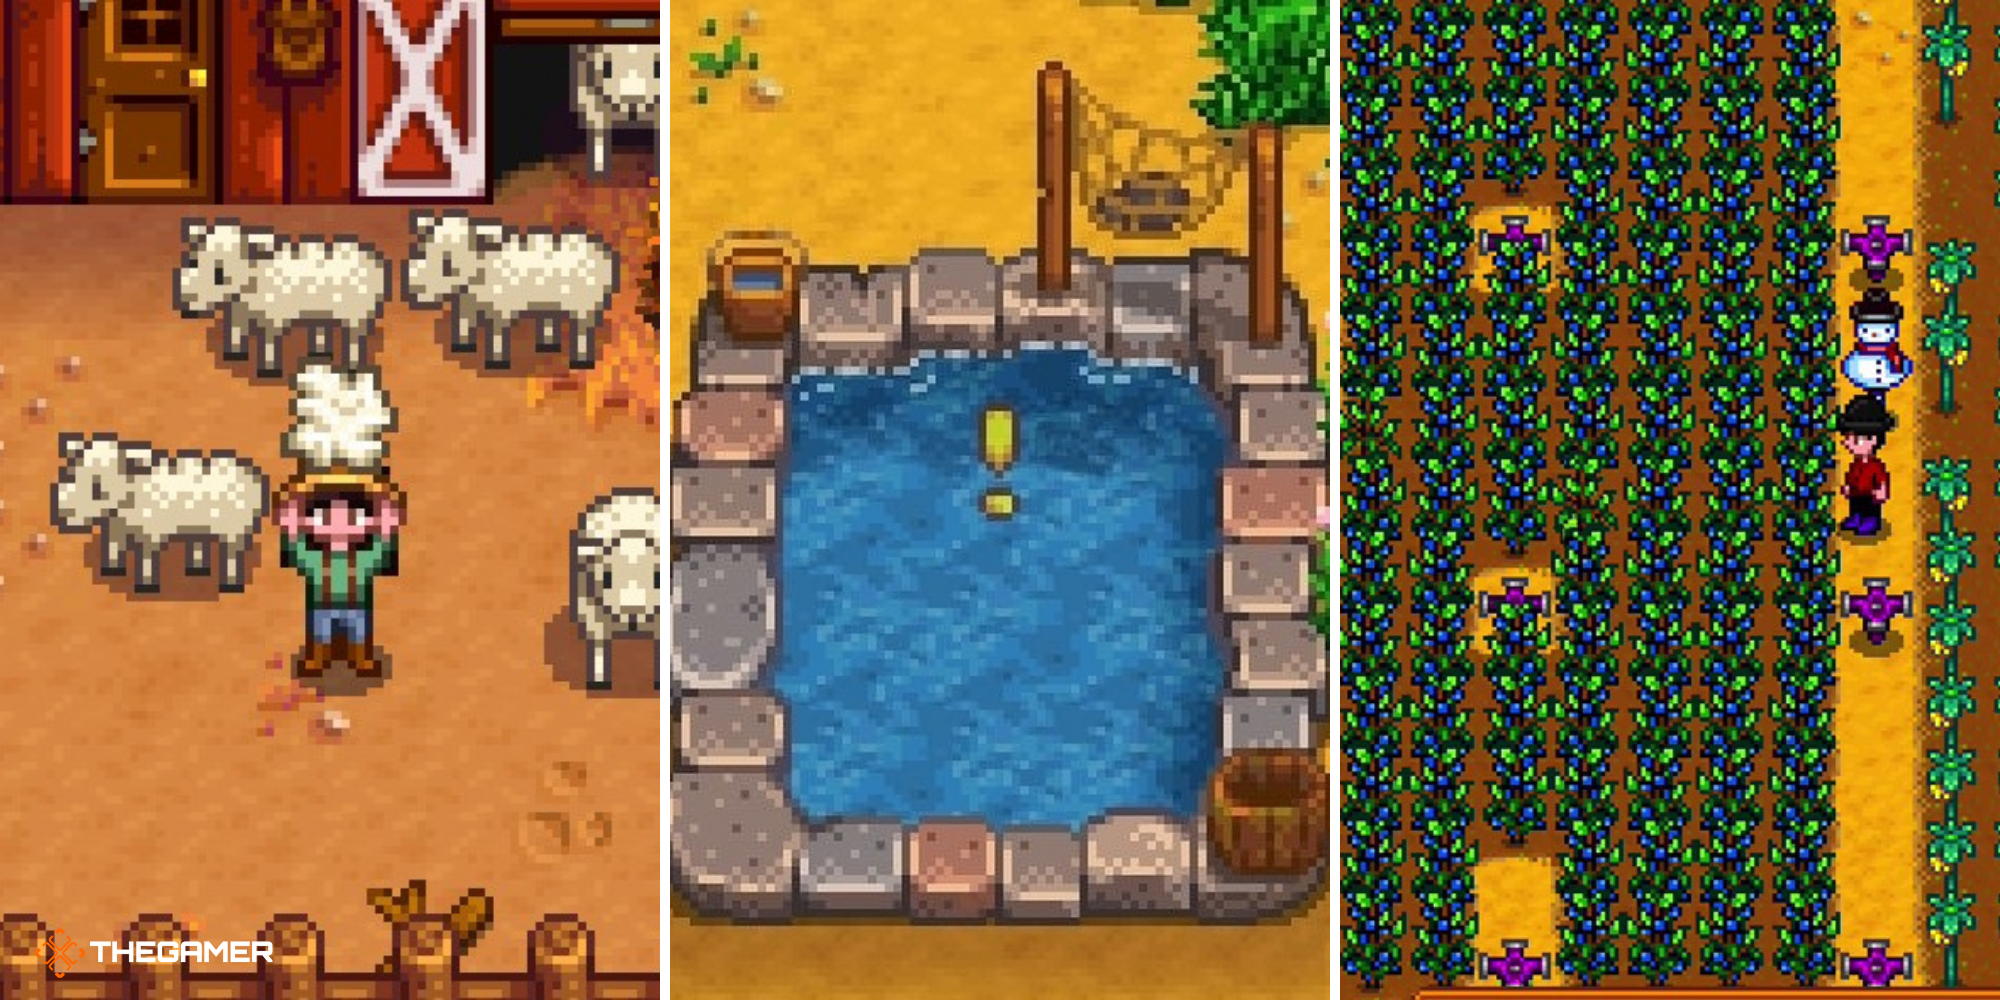 Stardew Valley - Player with sheep on left, Player with blueberries on right, fish pond in centre